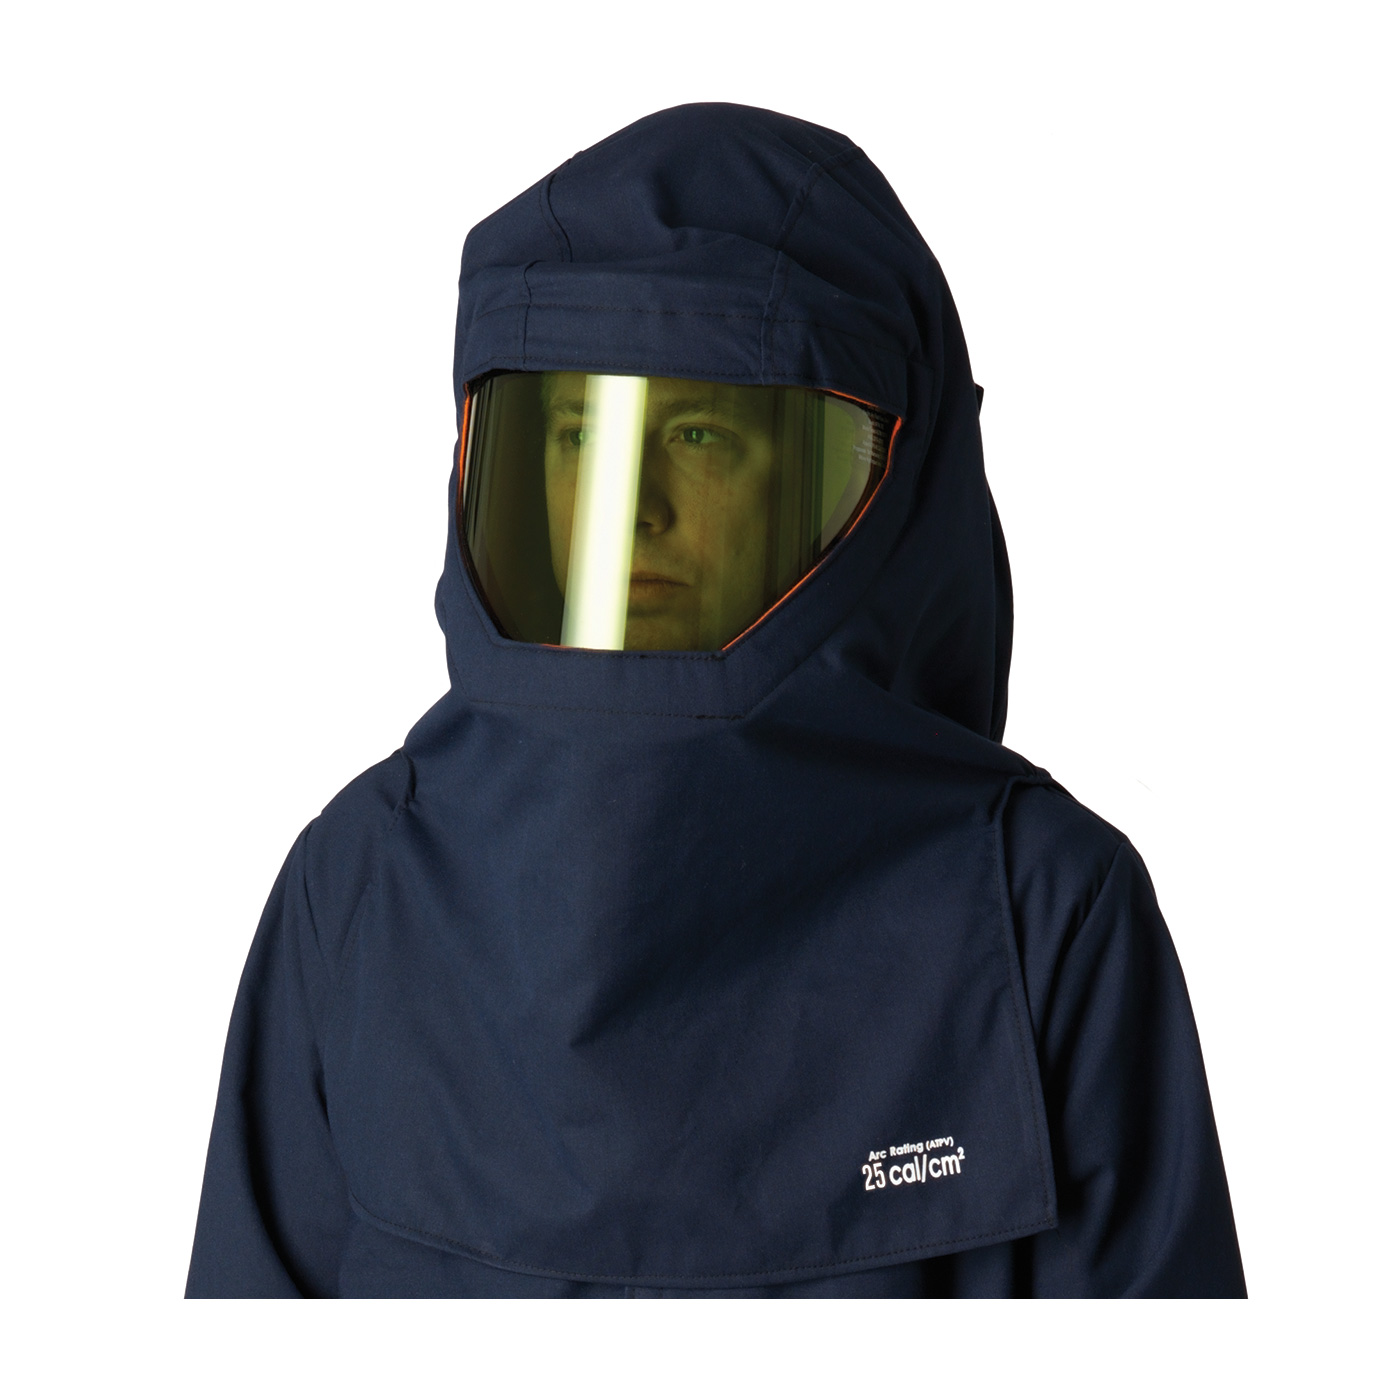 PIP® Navy 25 Cal/cm2 Two Layer Arc & Fire Resistant Hood - 7/7oz.